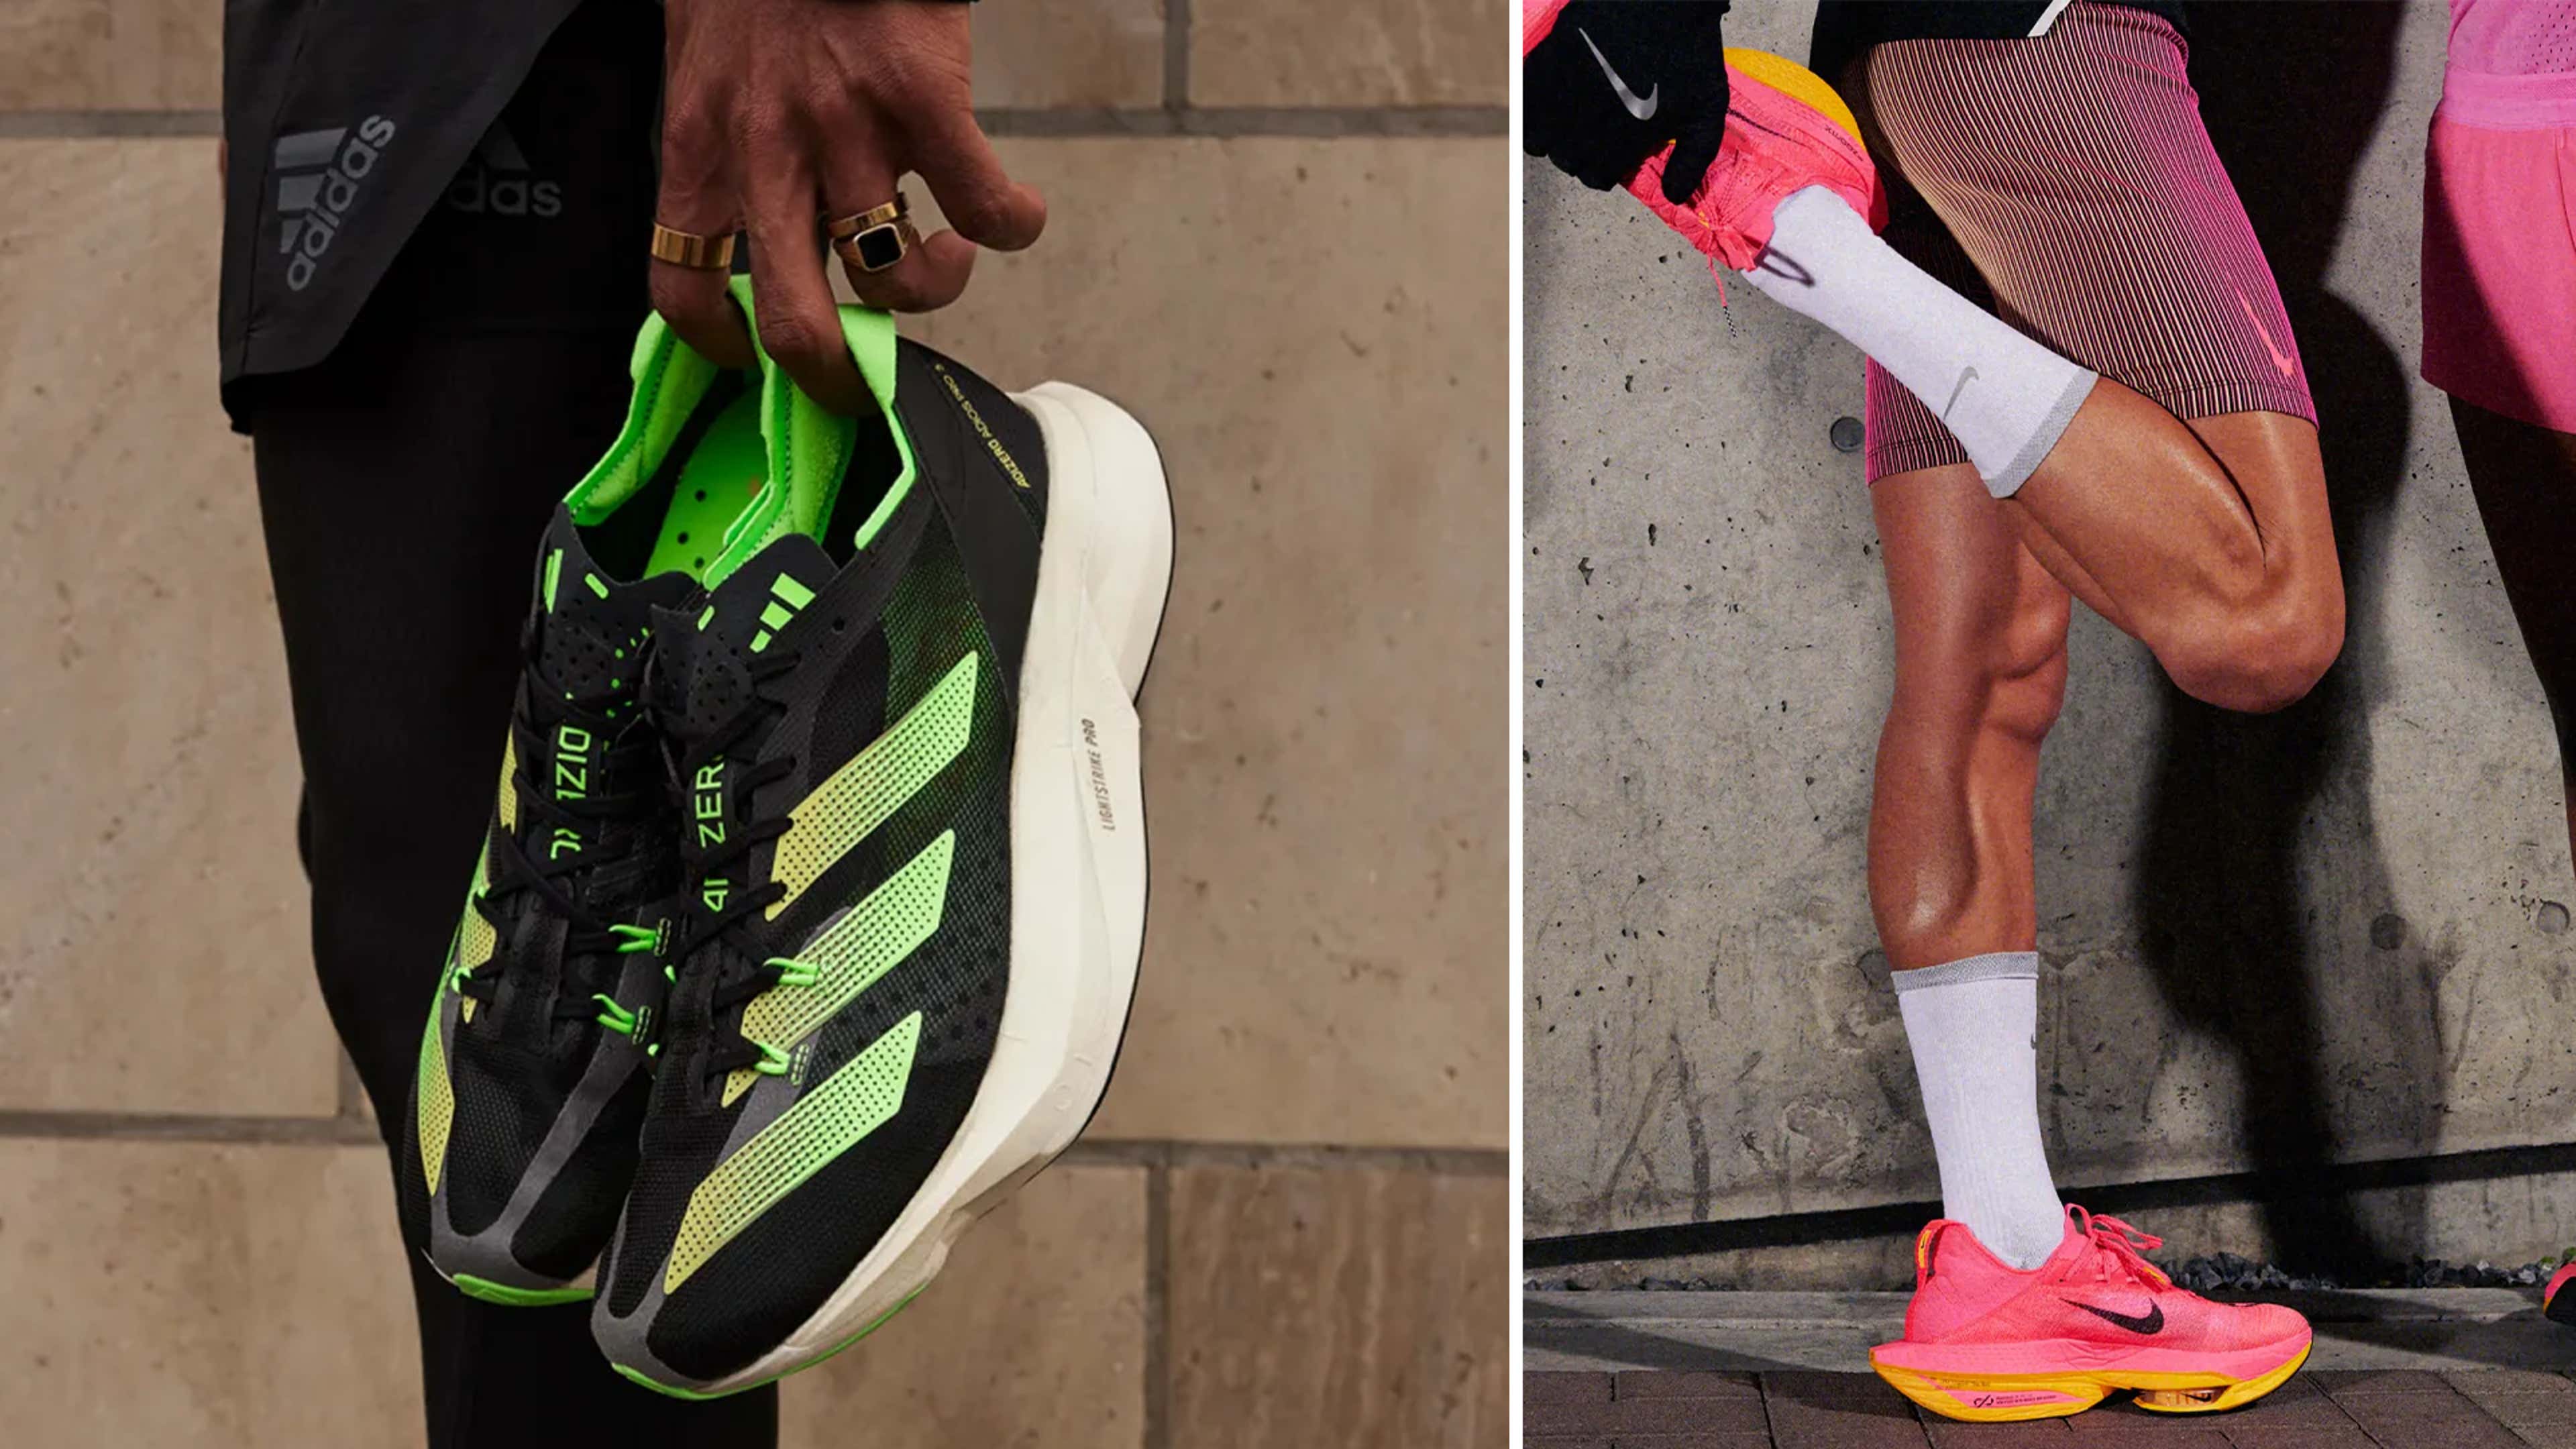 How On's Running Sneakers Won Over Tech Bros and High Fashion Alike - WSJ